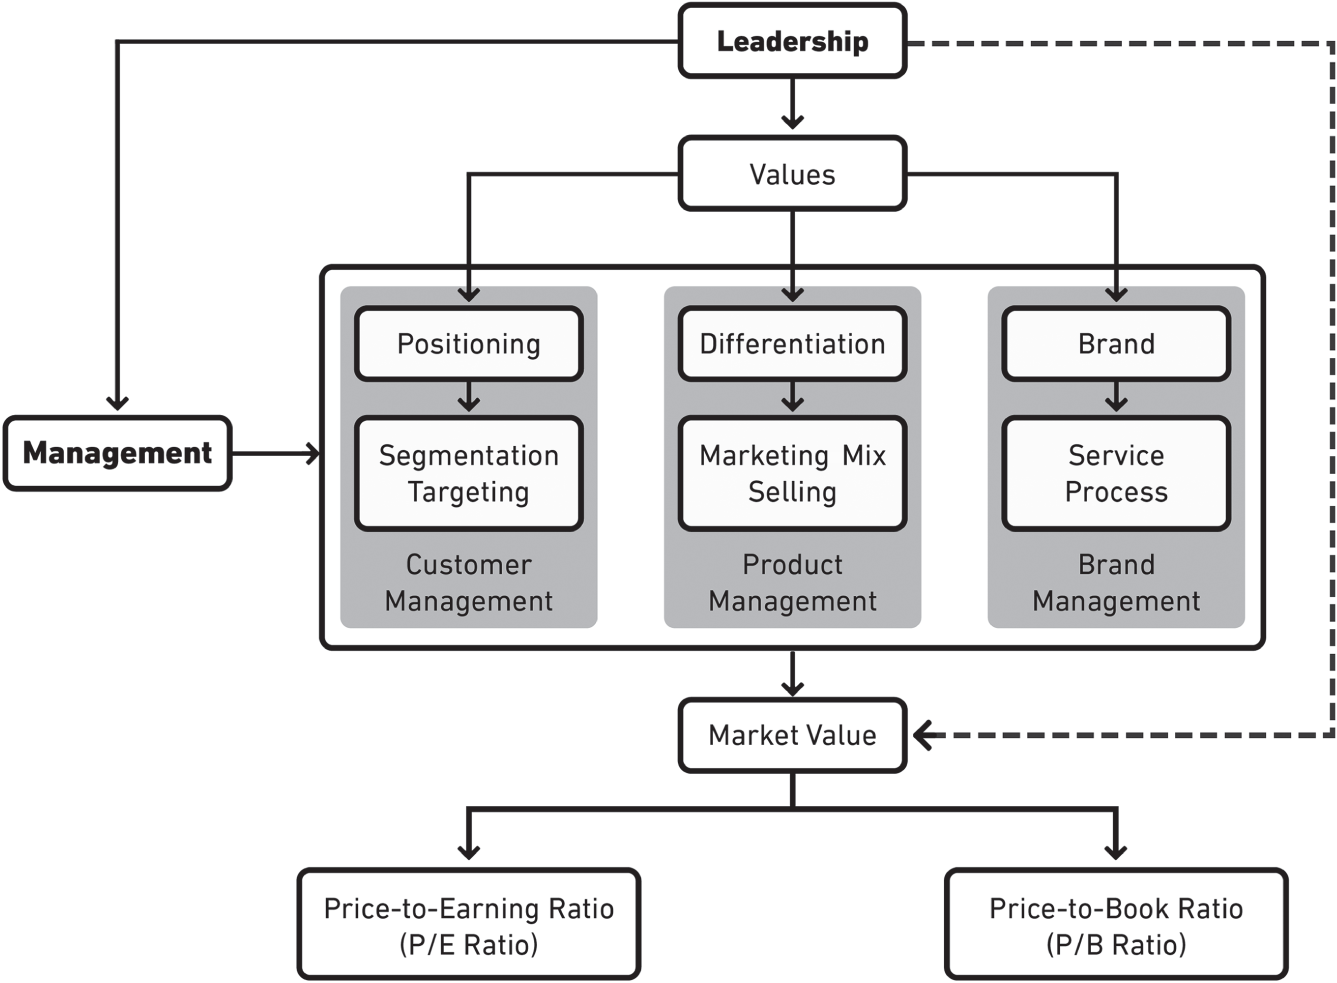 Schematic illustration of leadership and management: From values to market value